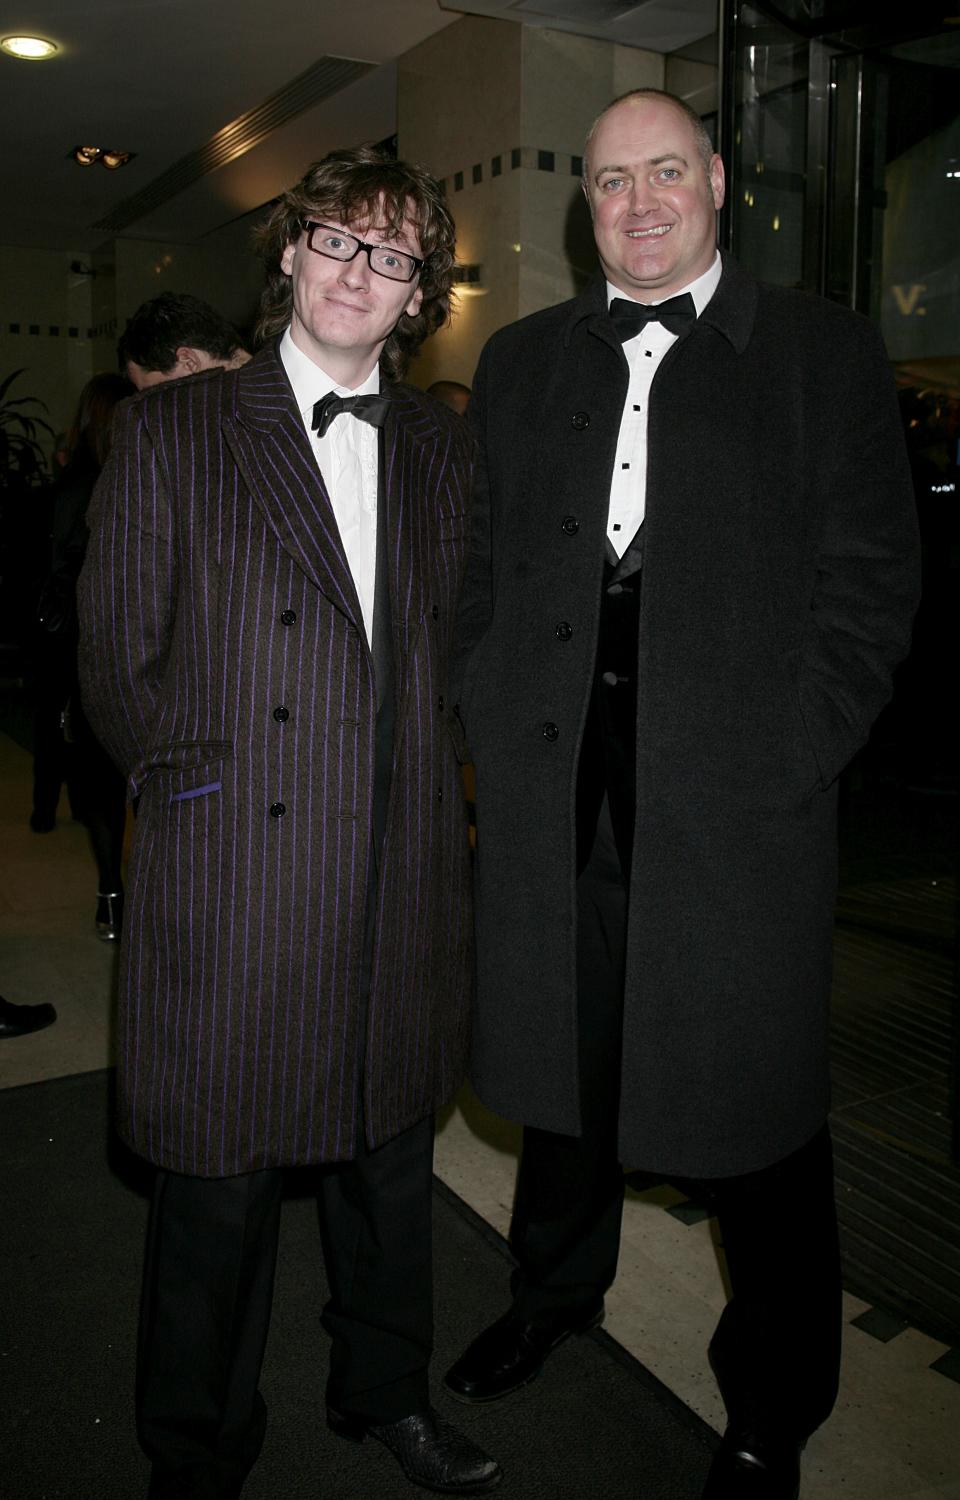 Dara O'Briain and Ed Byrne (left) arrive for the 2007 British Comedy Awards (Photo by Yui Mok - PA Images/PA Images via Getty Images)